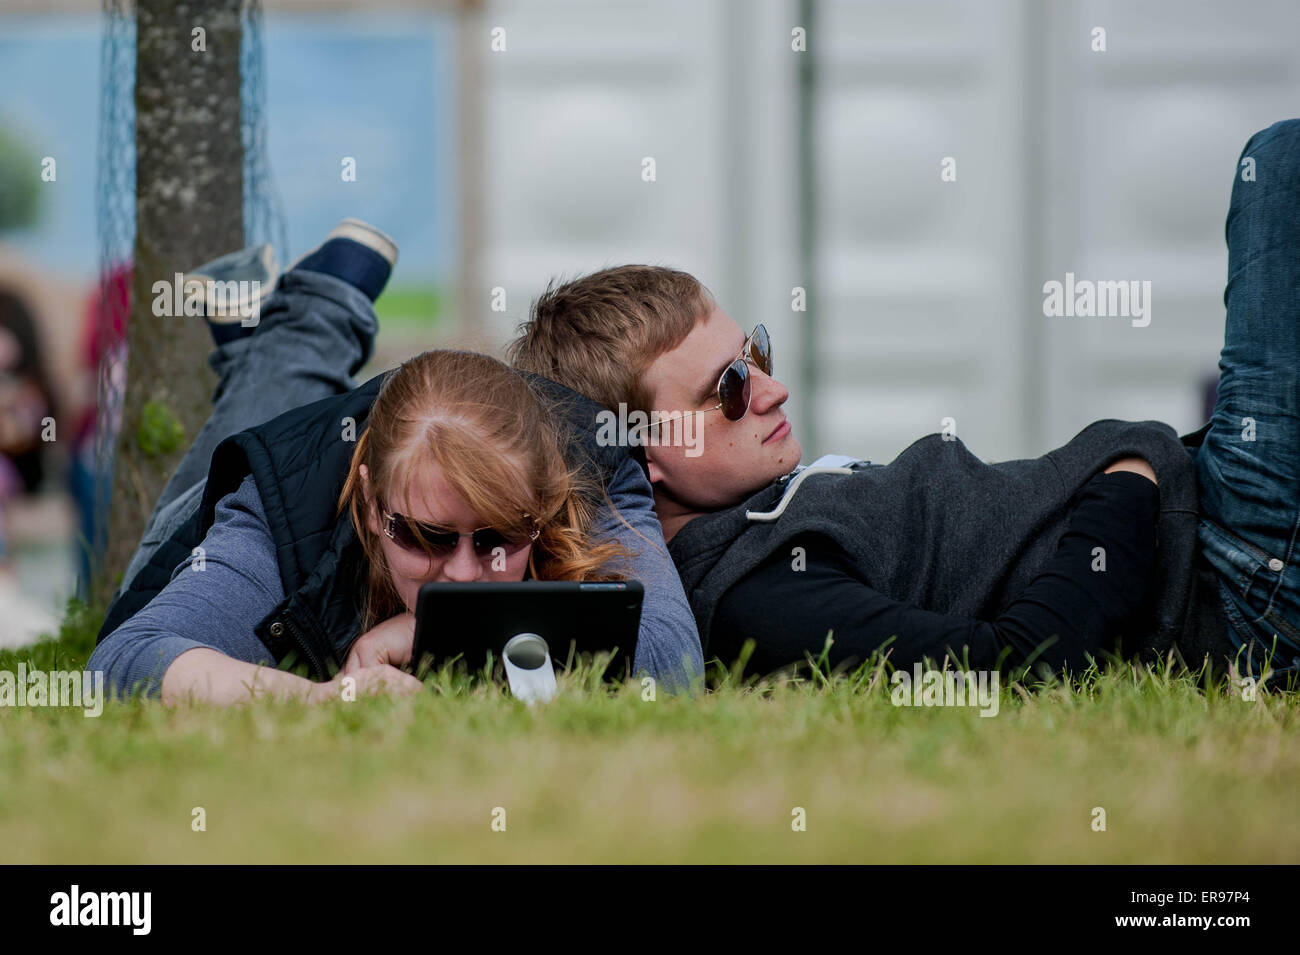 Hay on Wye, UK. Thursday 28 May 2015  Pictured: People relax in the Sun at the Hay Festival RE: The Hay Festival takes place in Hay on Wye, Powys, Wales Stock Photo